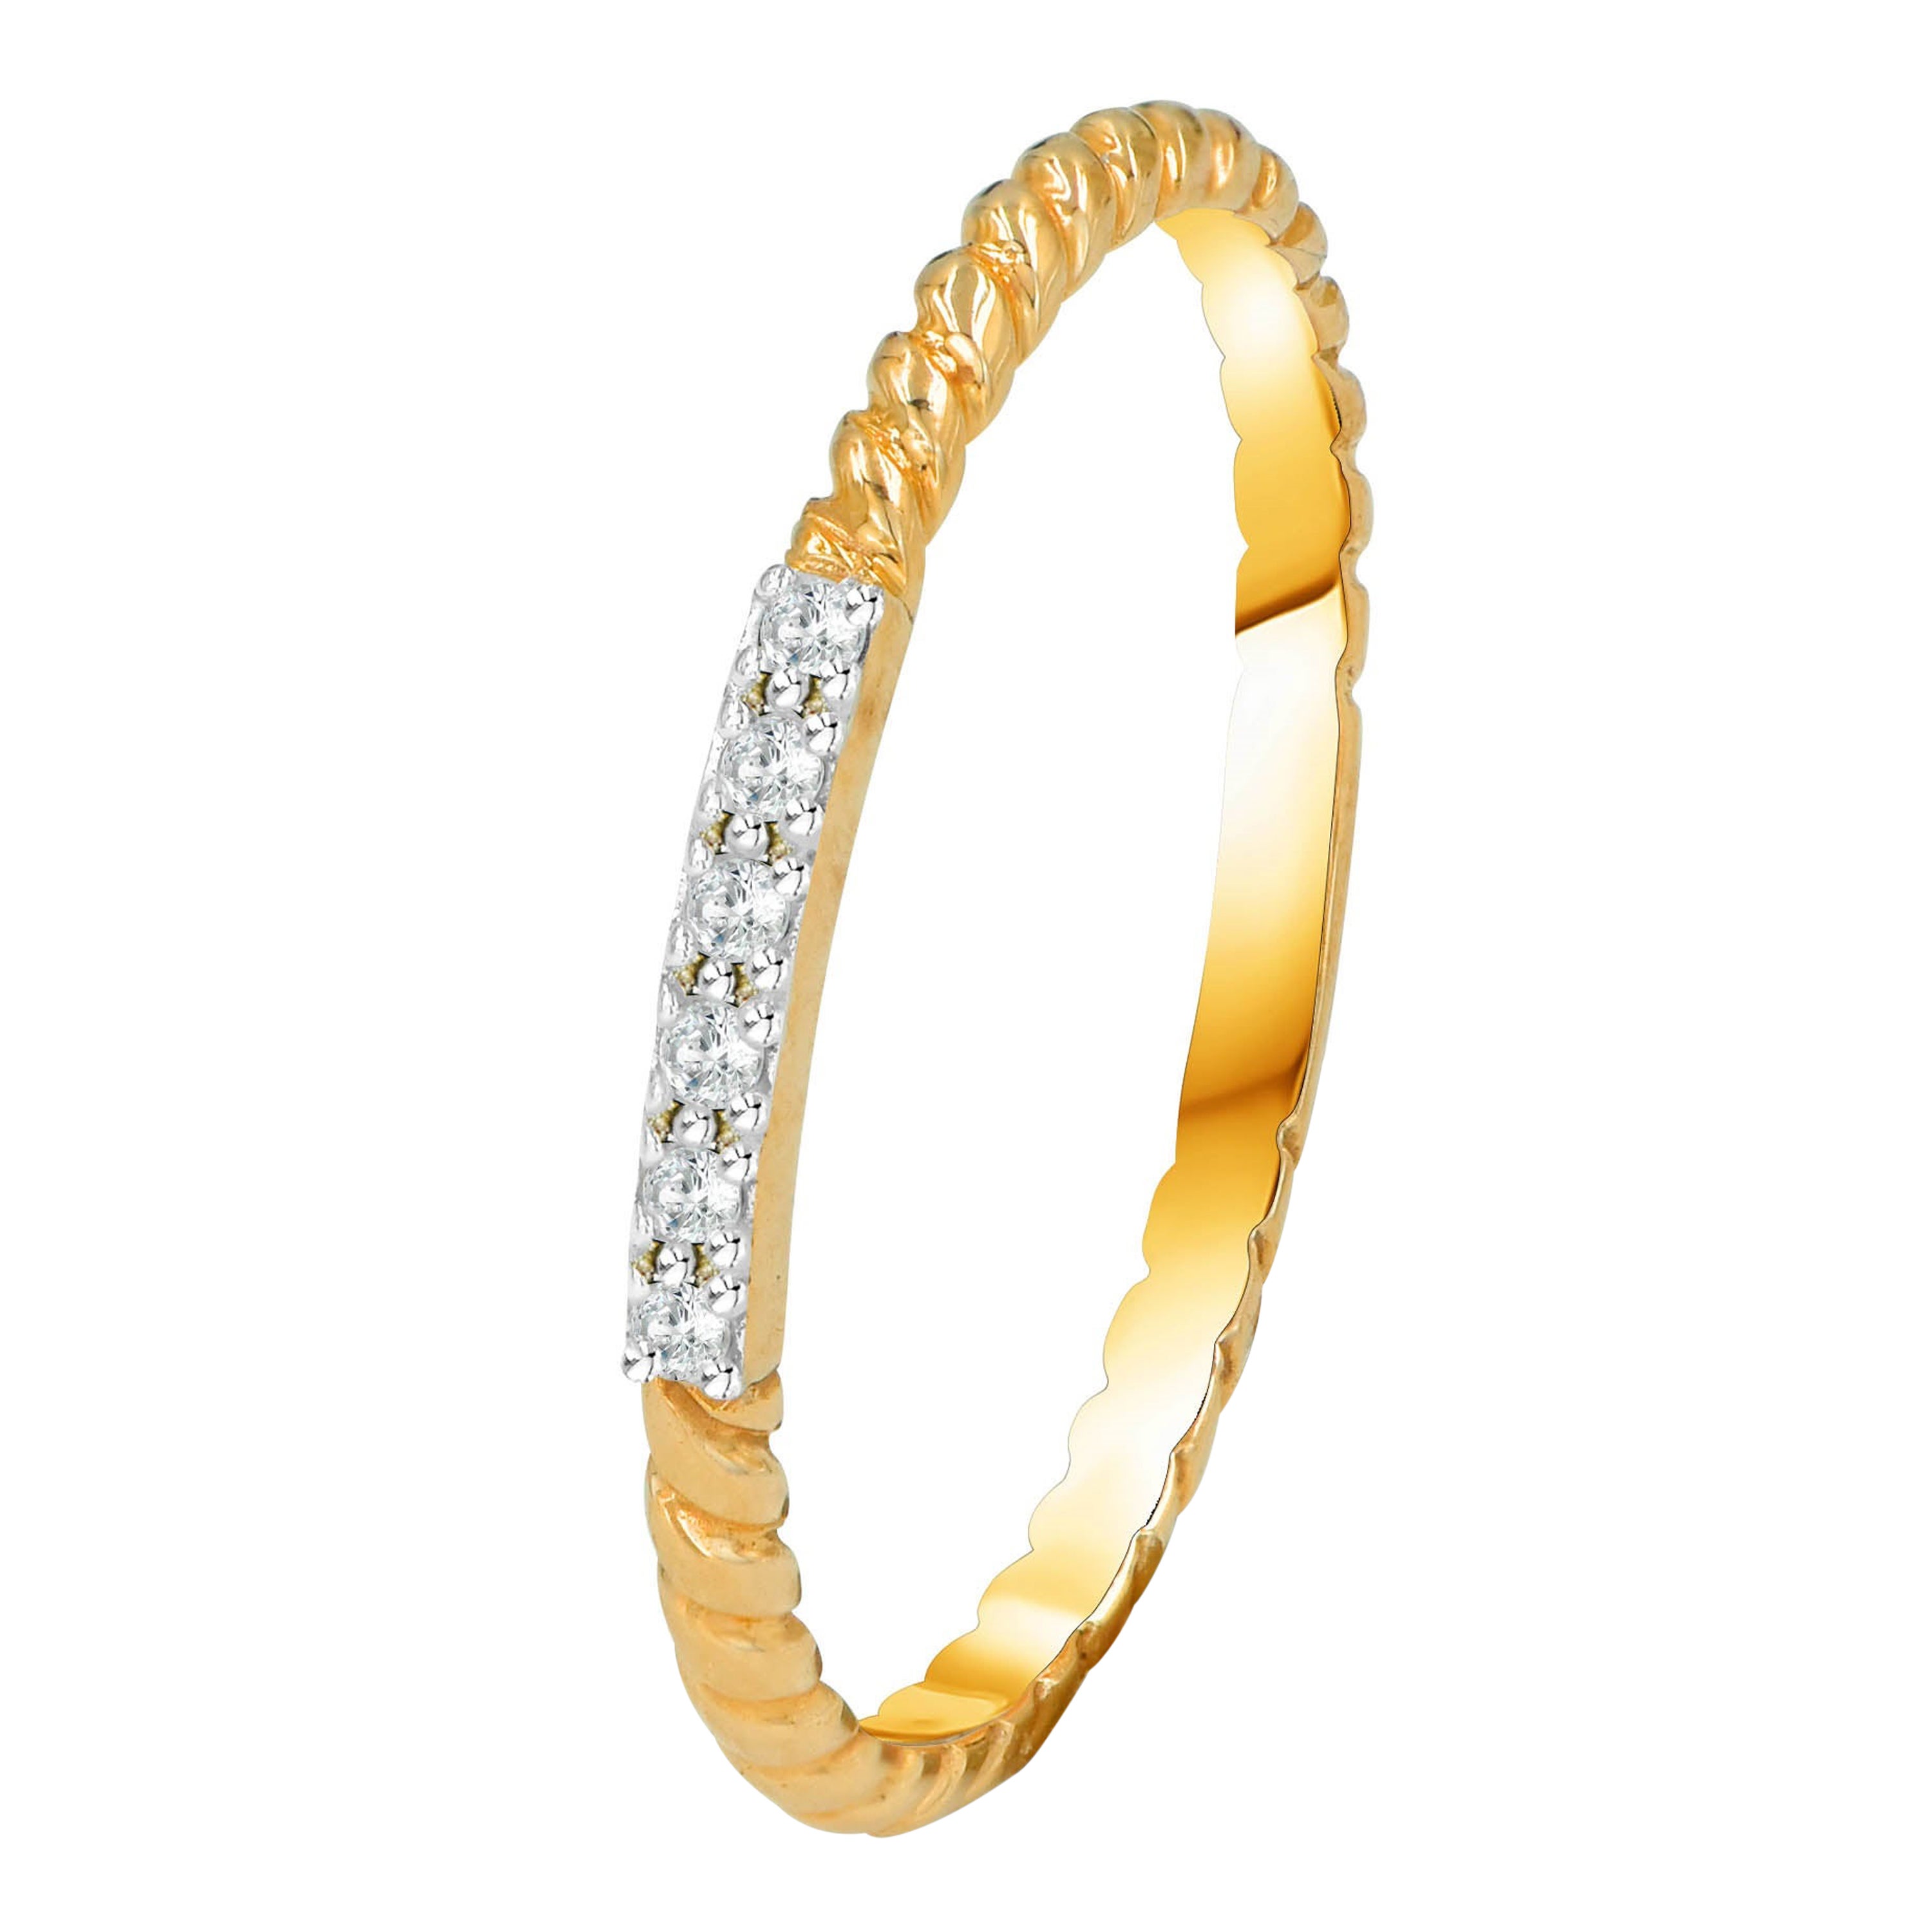 14K Gold and Diamond Ring Stackable Ring Unique Diamond Wedding Band